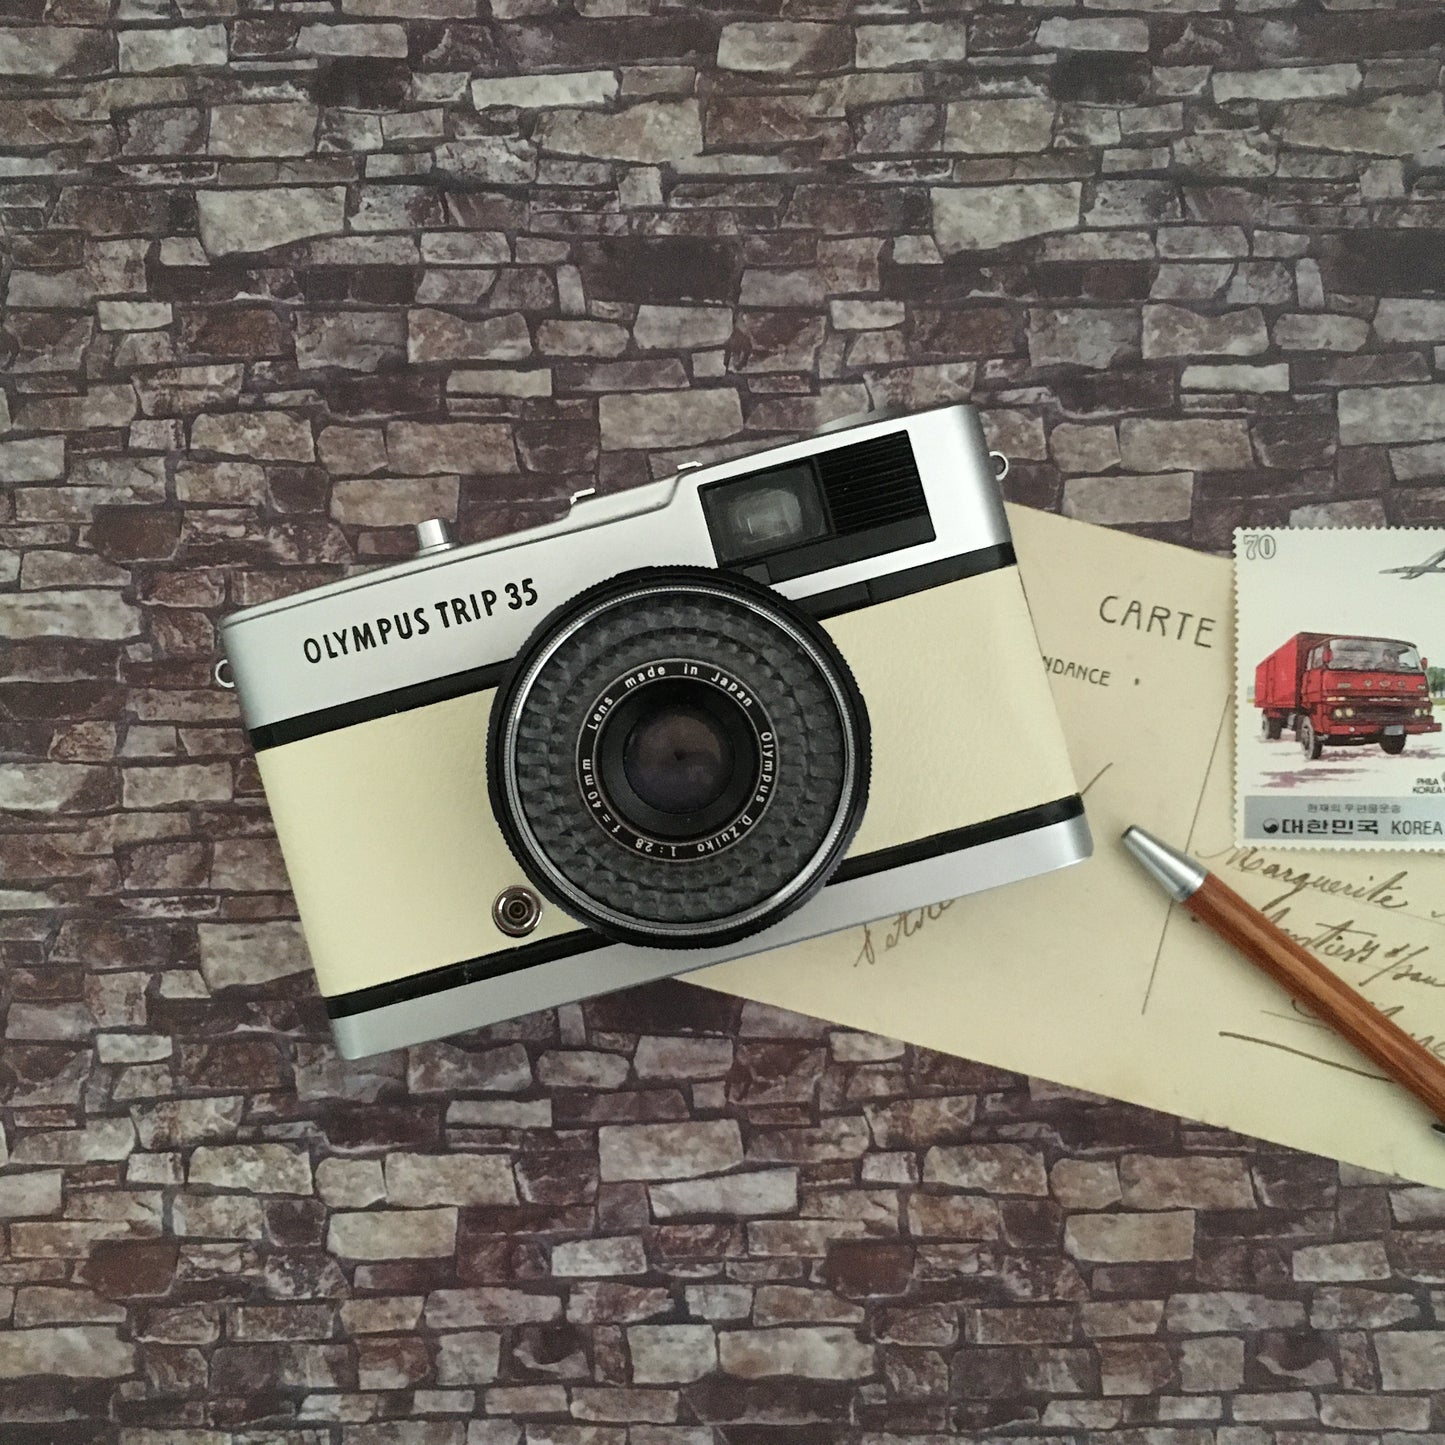 Olympus TRIP35  with milky white leather